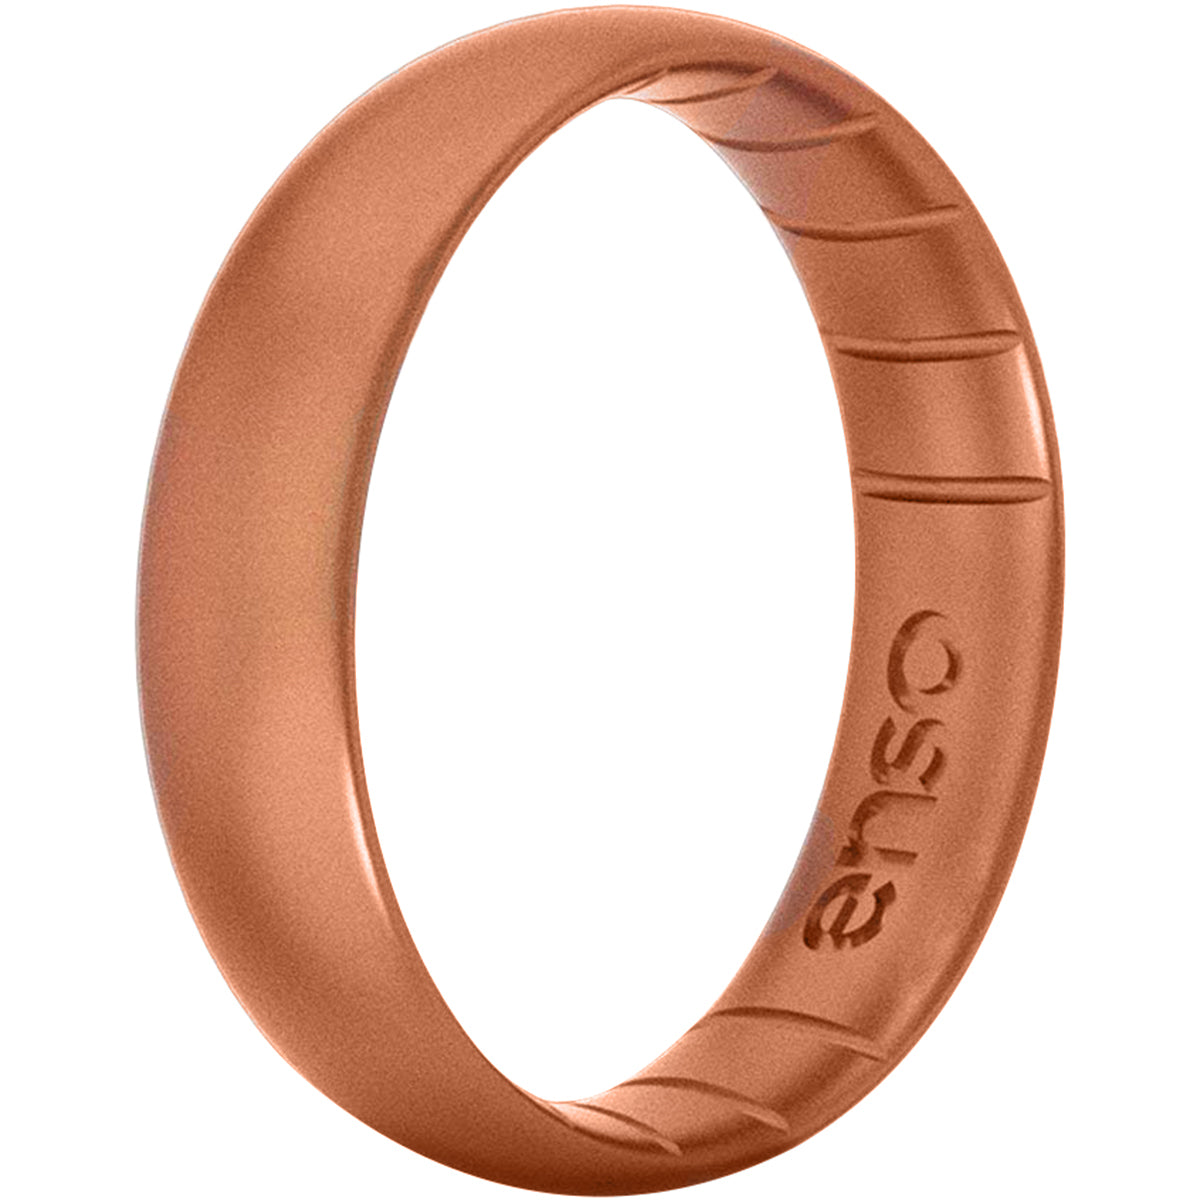 Enso Rings Halo Contour Elements Series Silicone Ring - 5 - Gold 